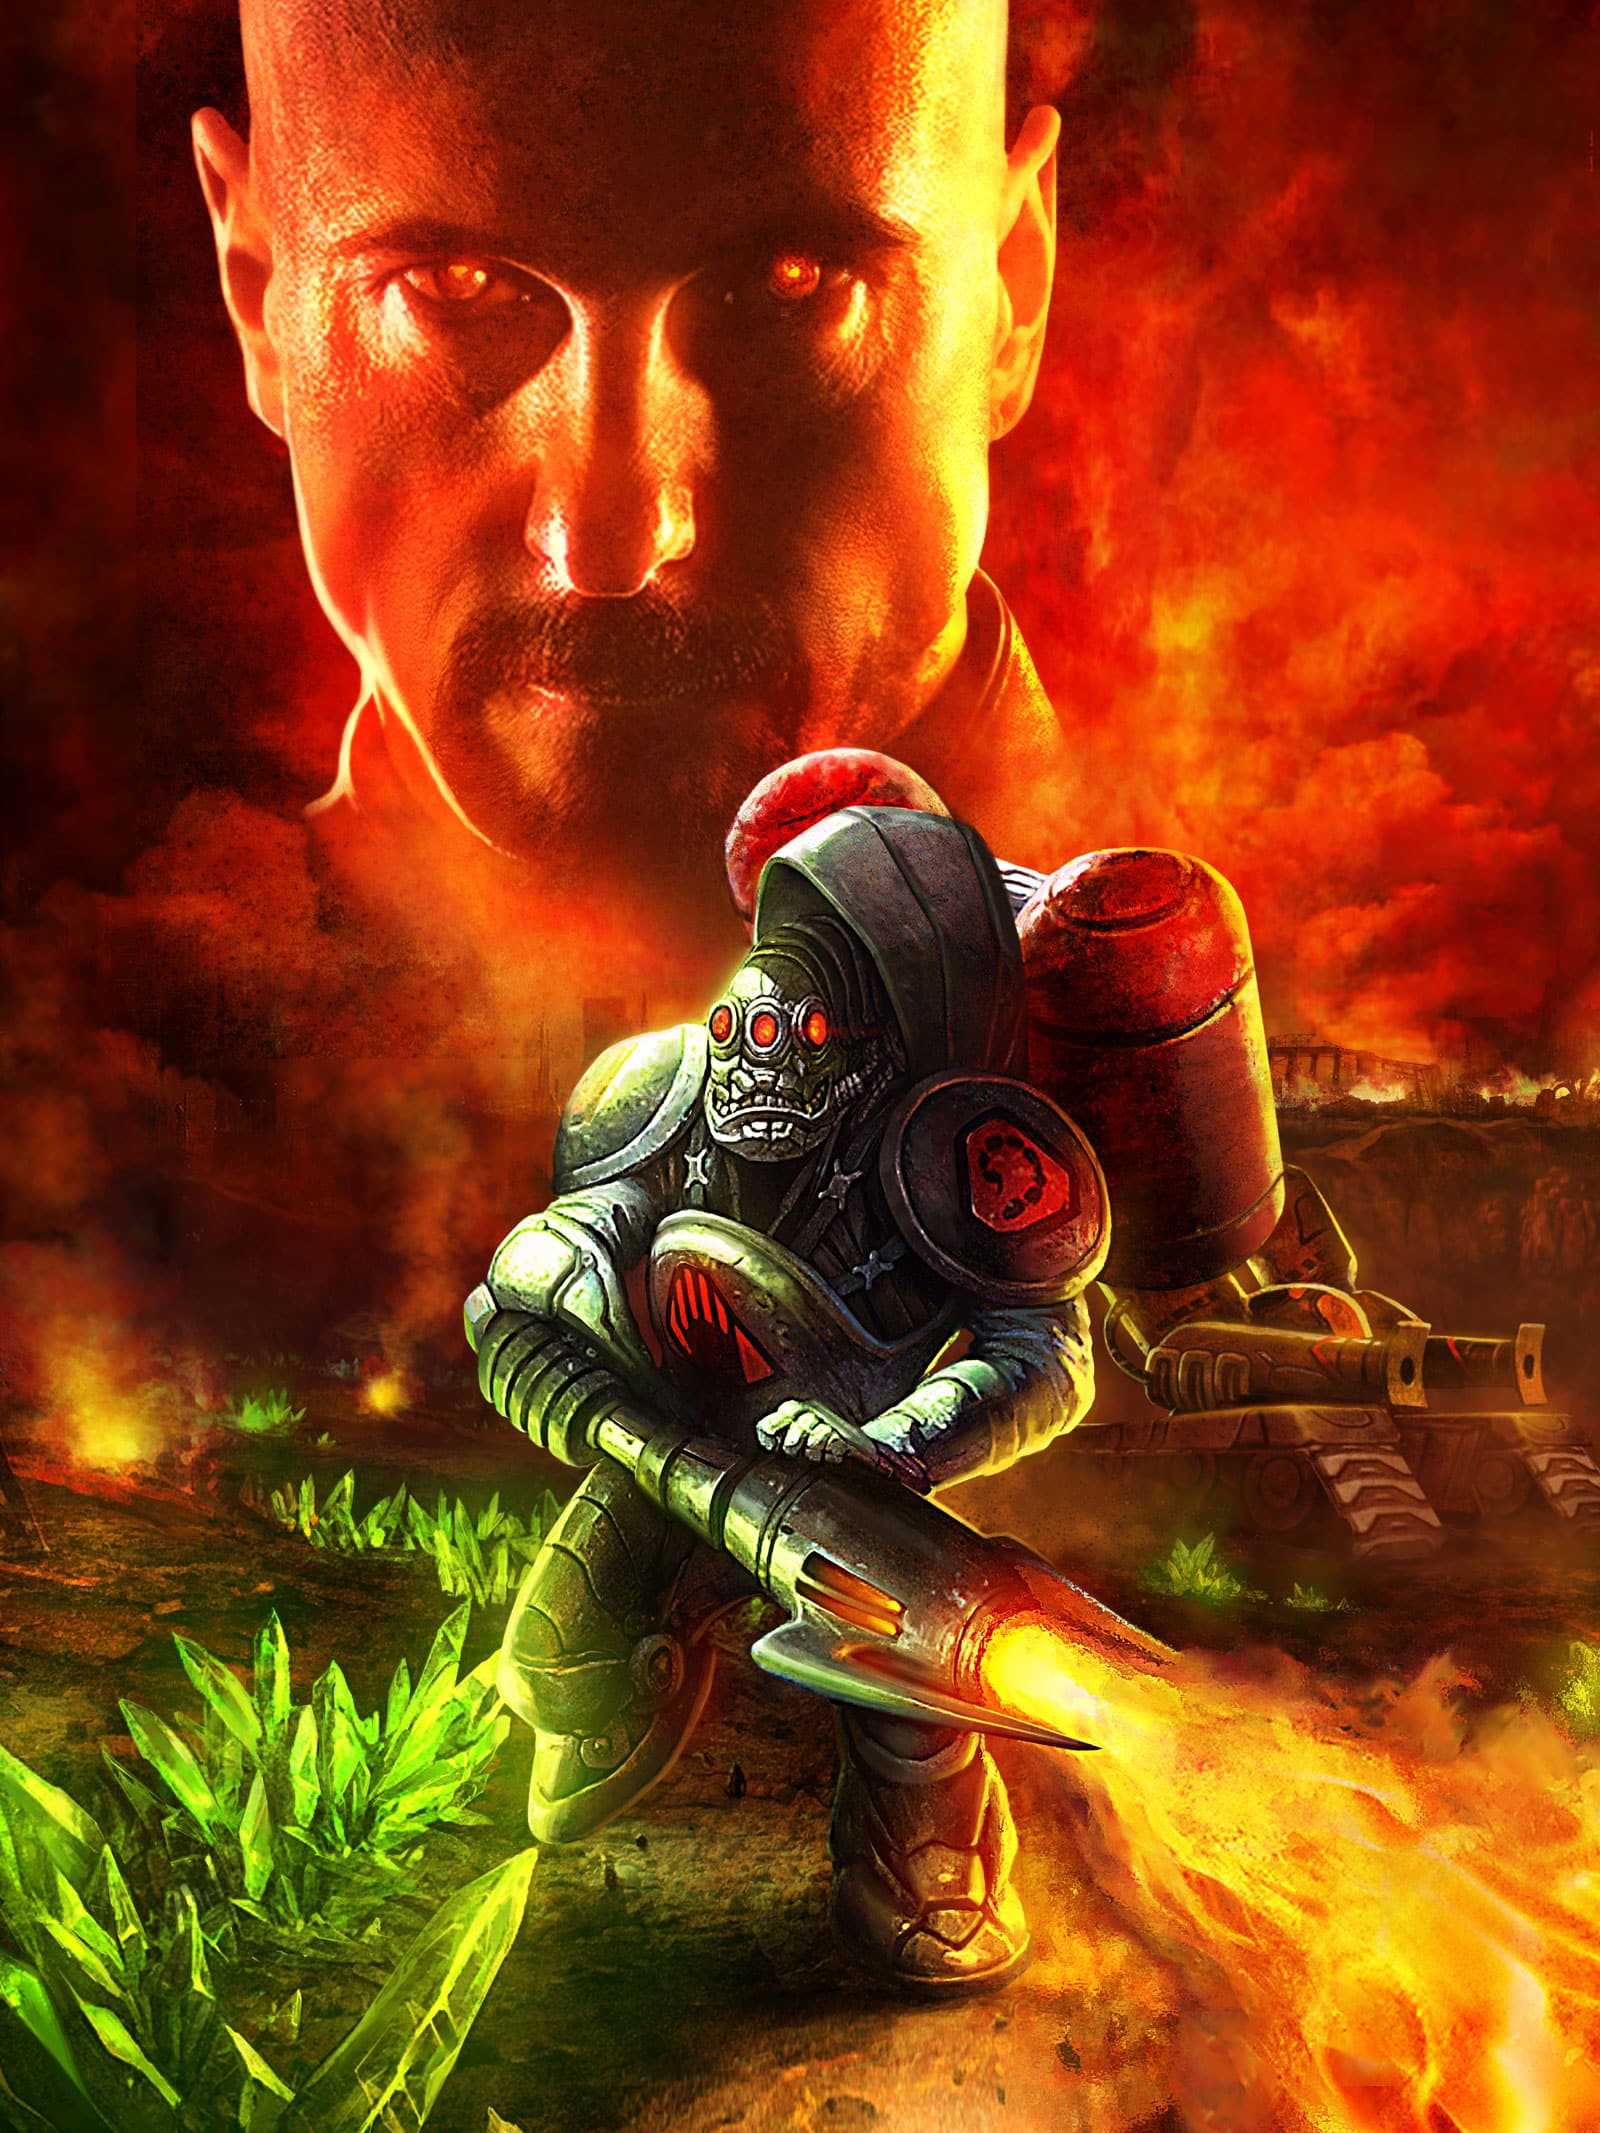 command and conquer art